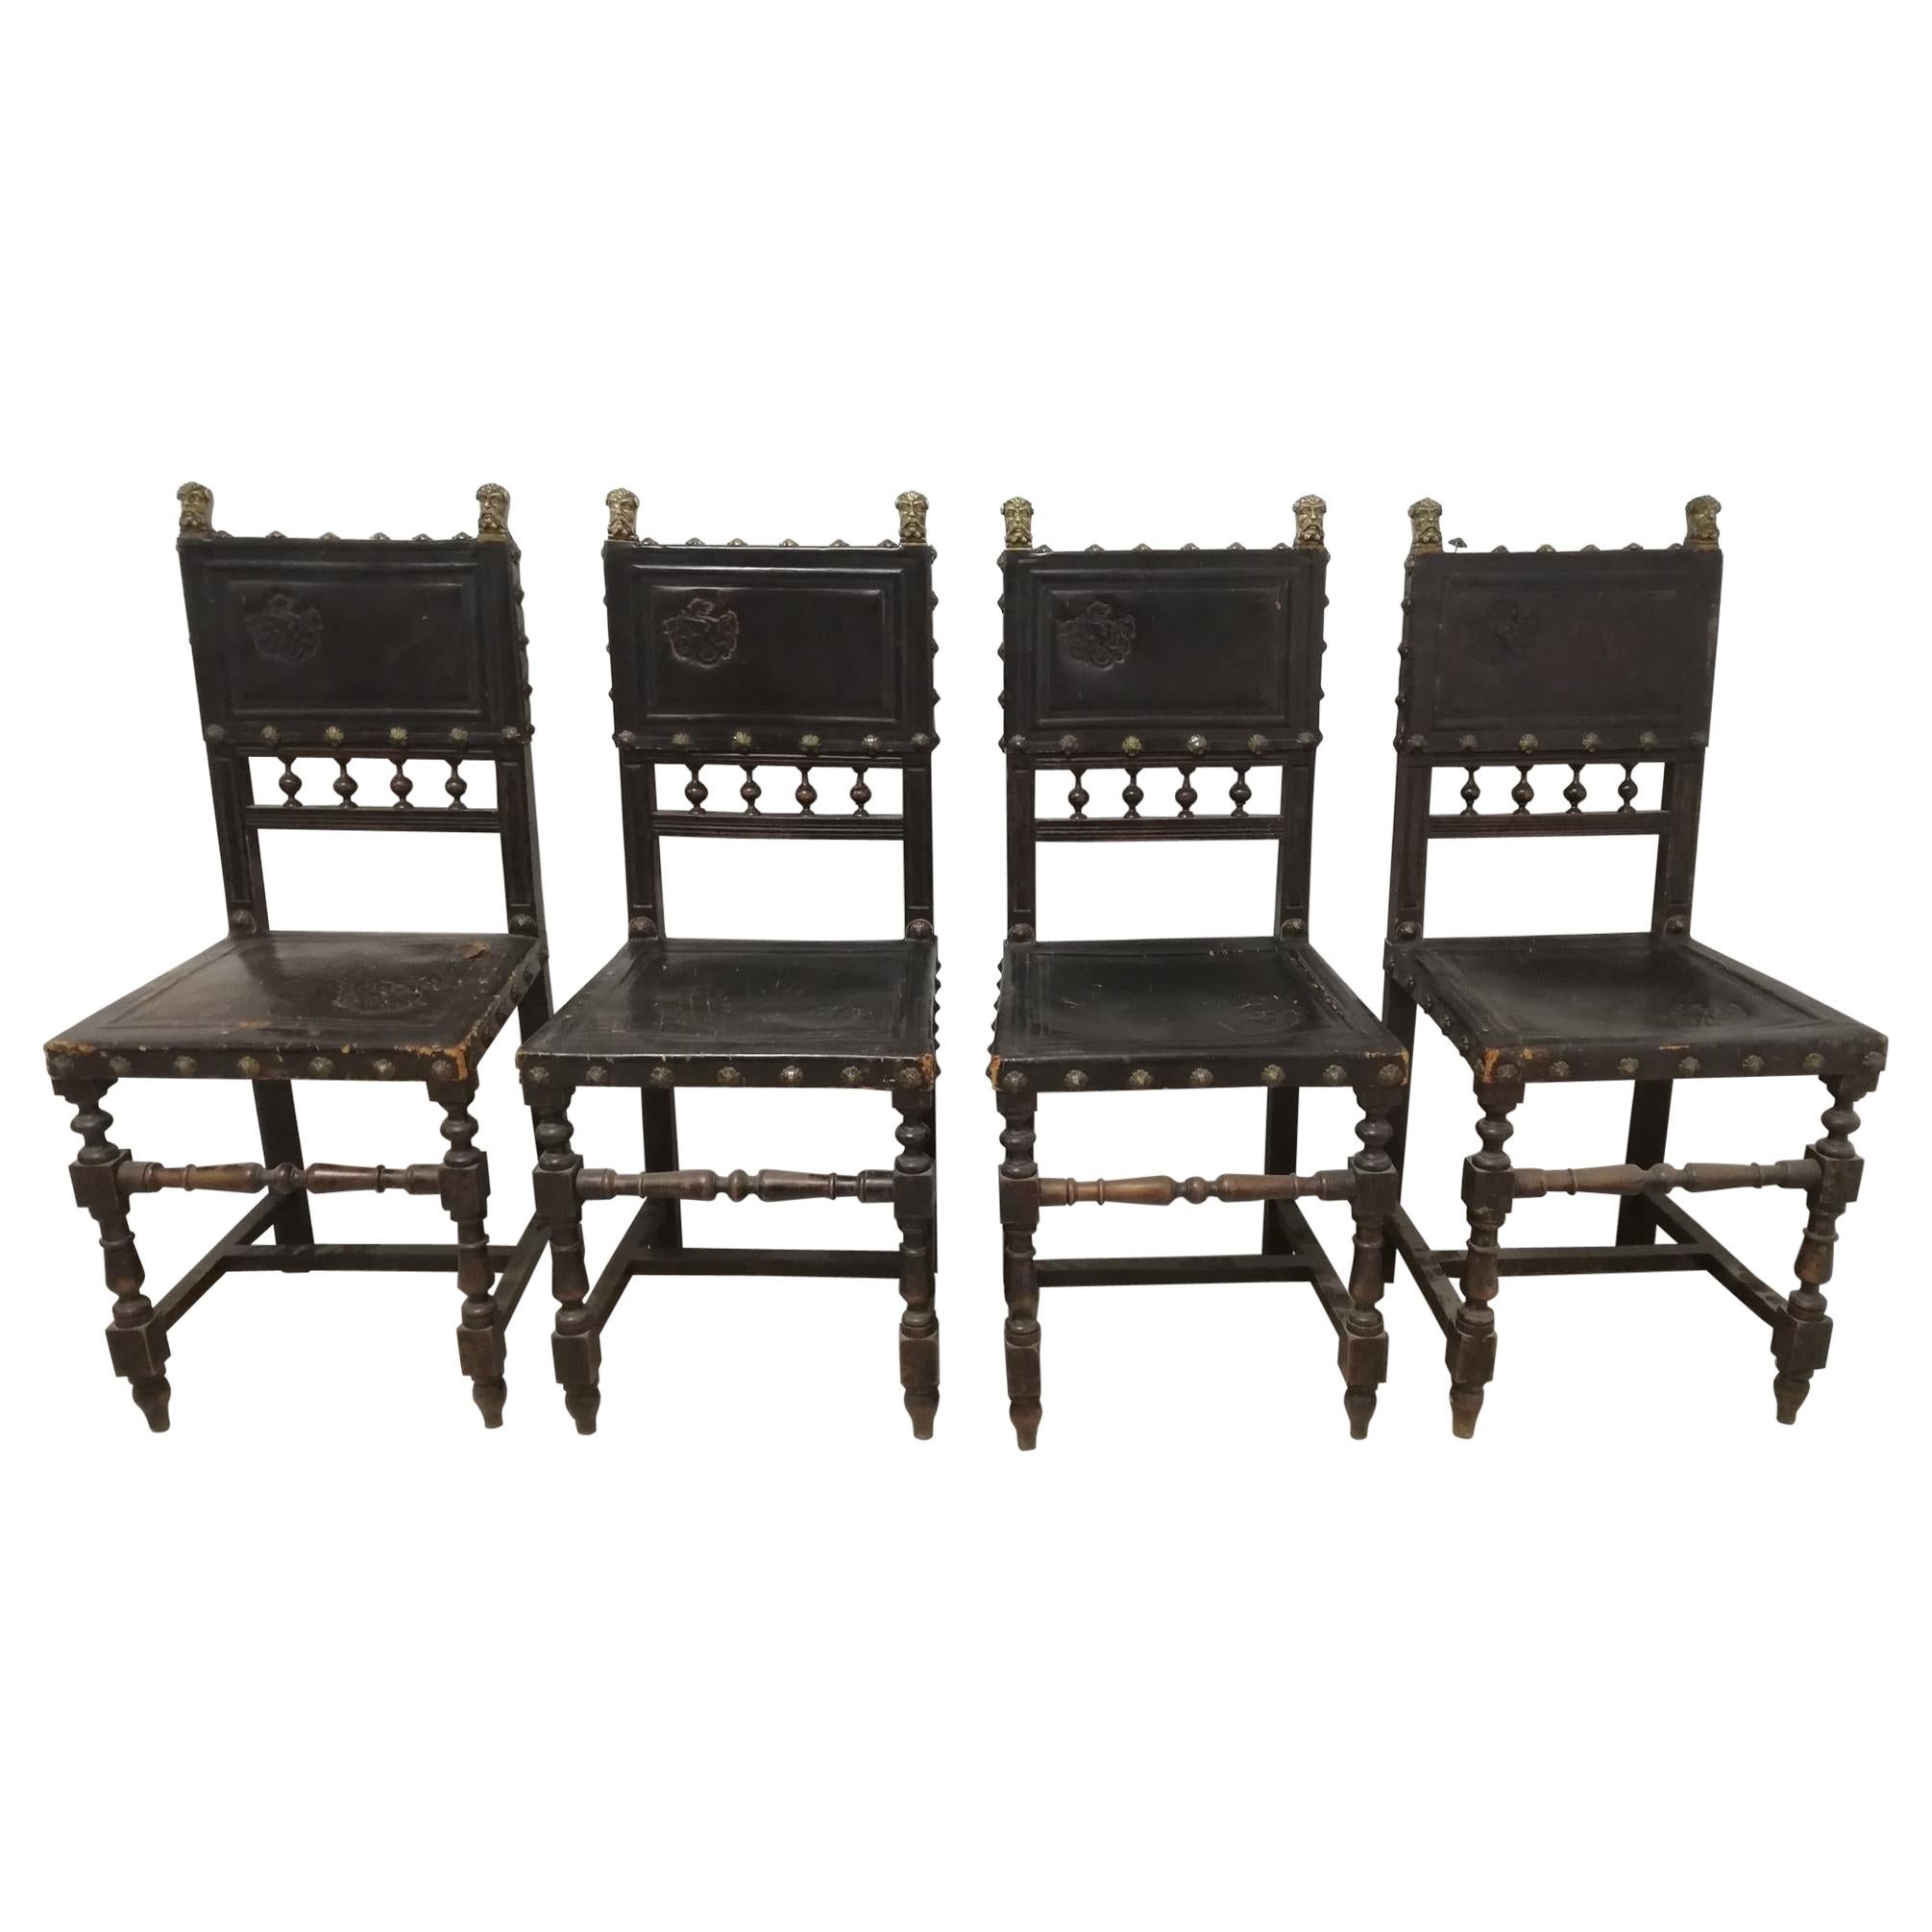 Set of 4 Armchairs from the 19th Century in Rennaisance Louis XVIII Style For Sale